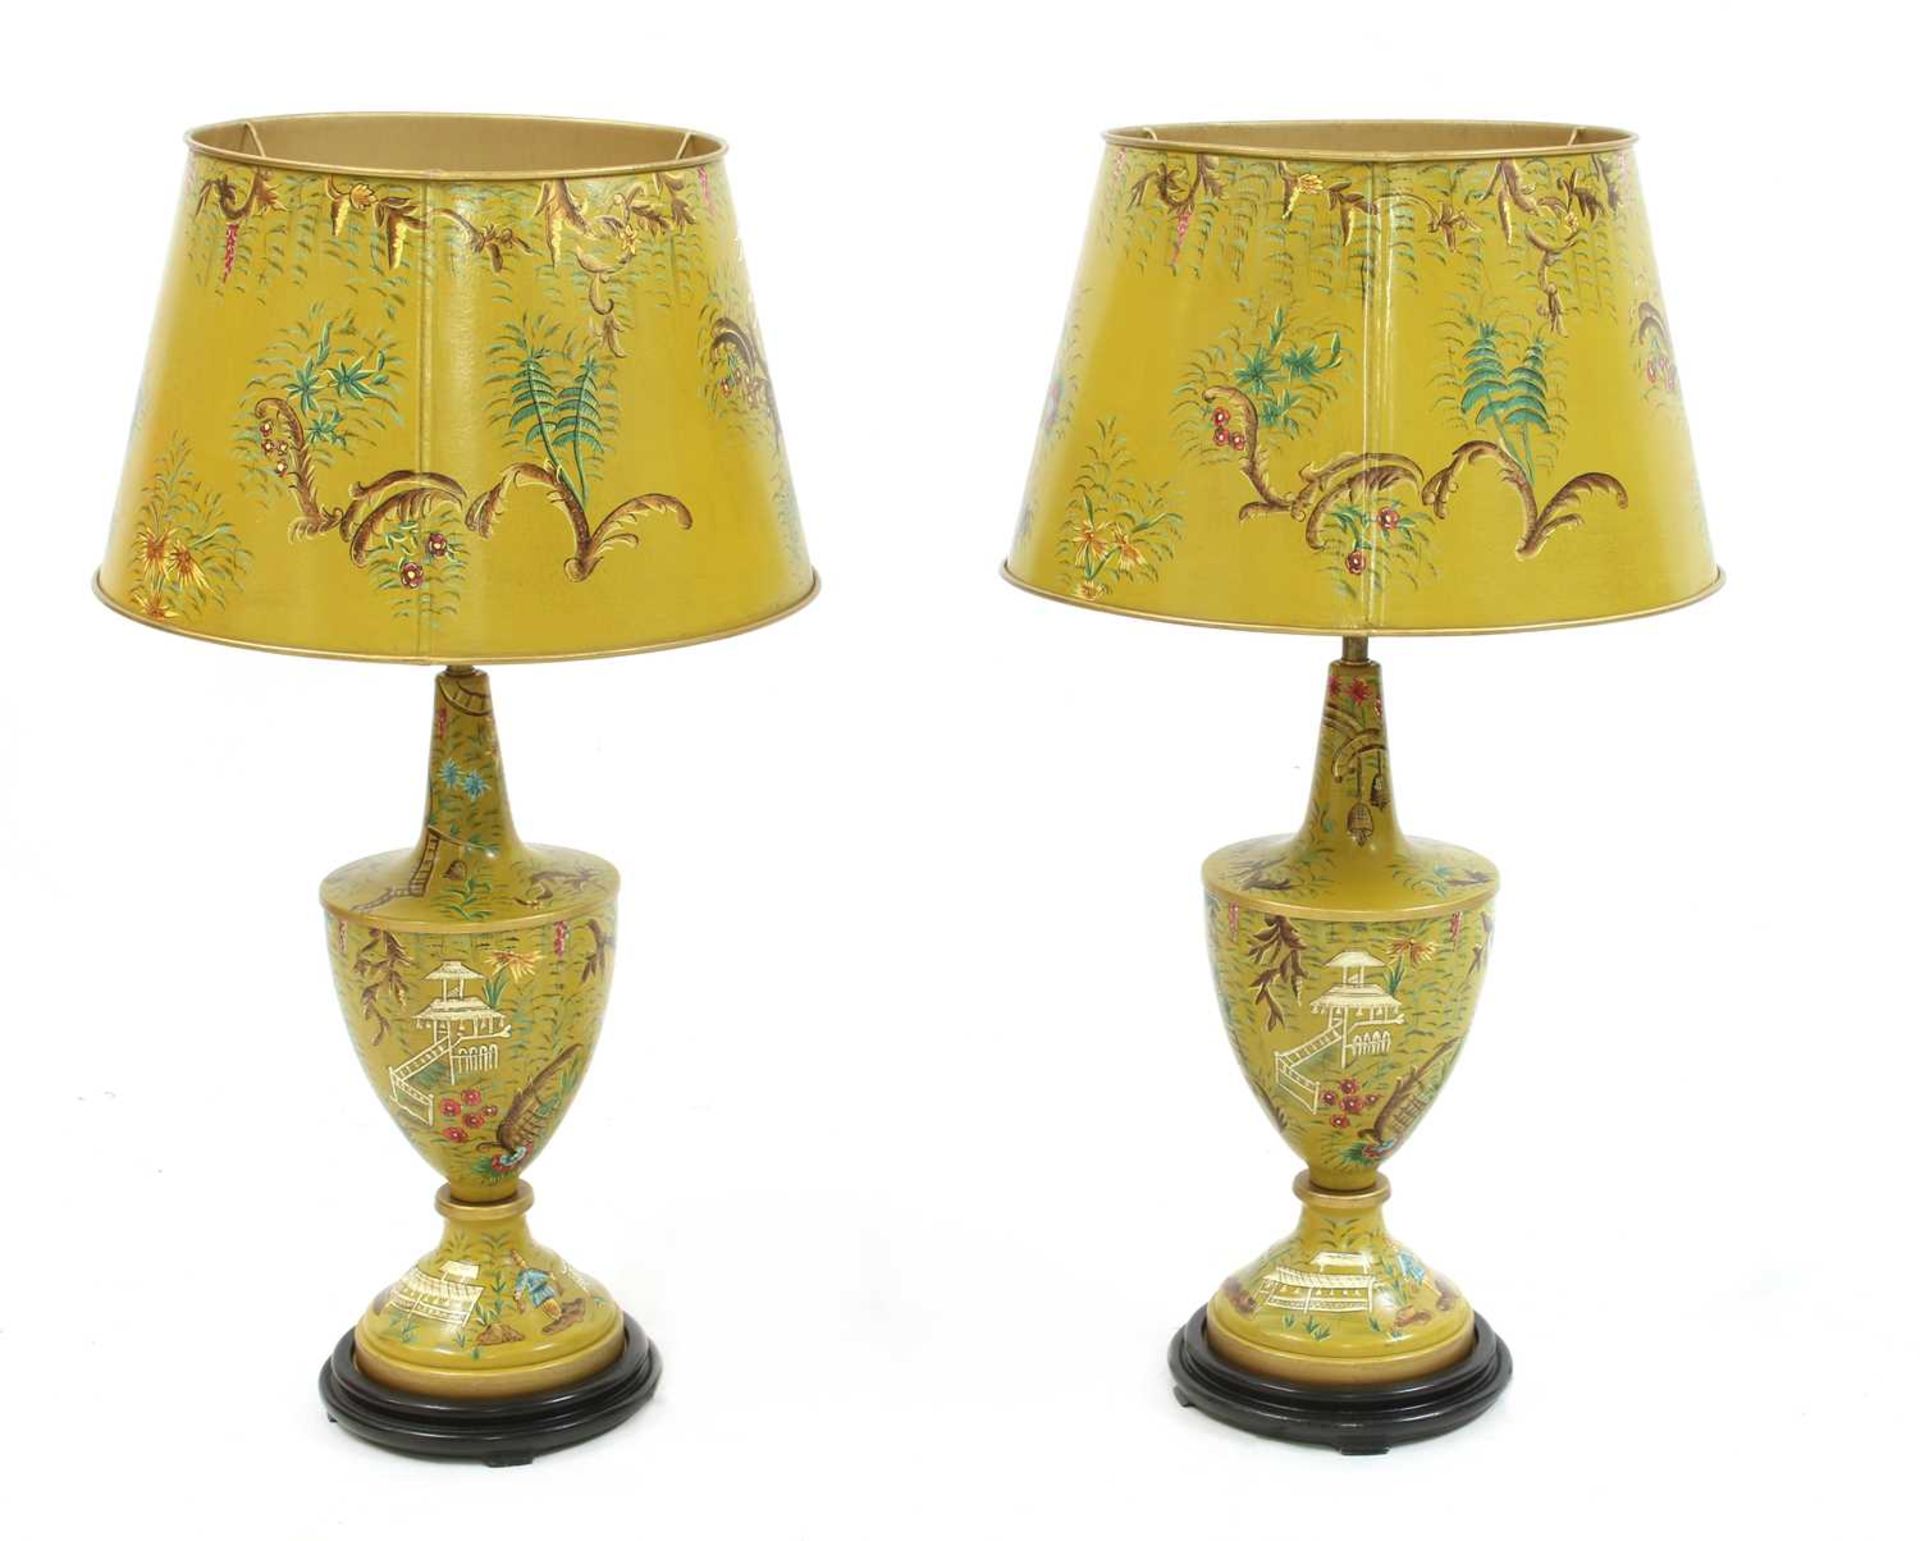 A pair of yellow toleware-style table lamps and shades, - Image 2 of 2